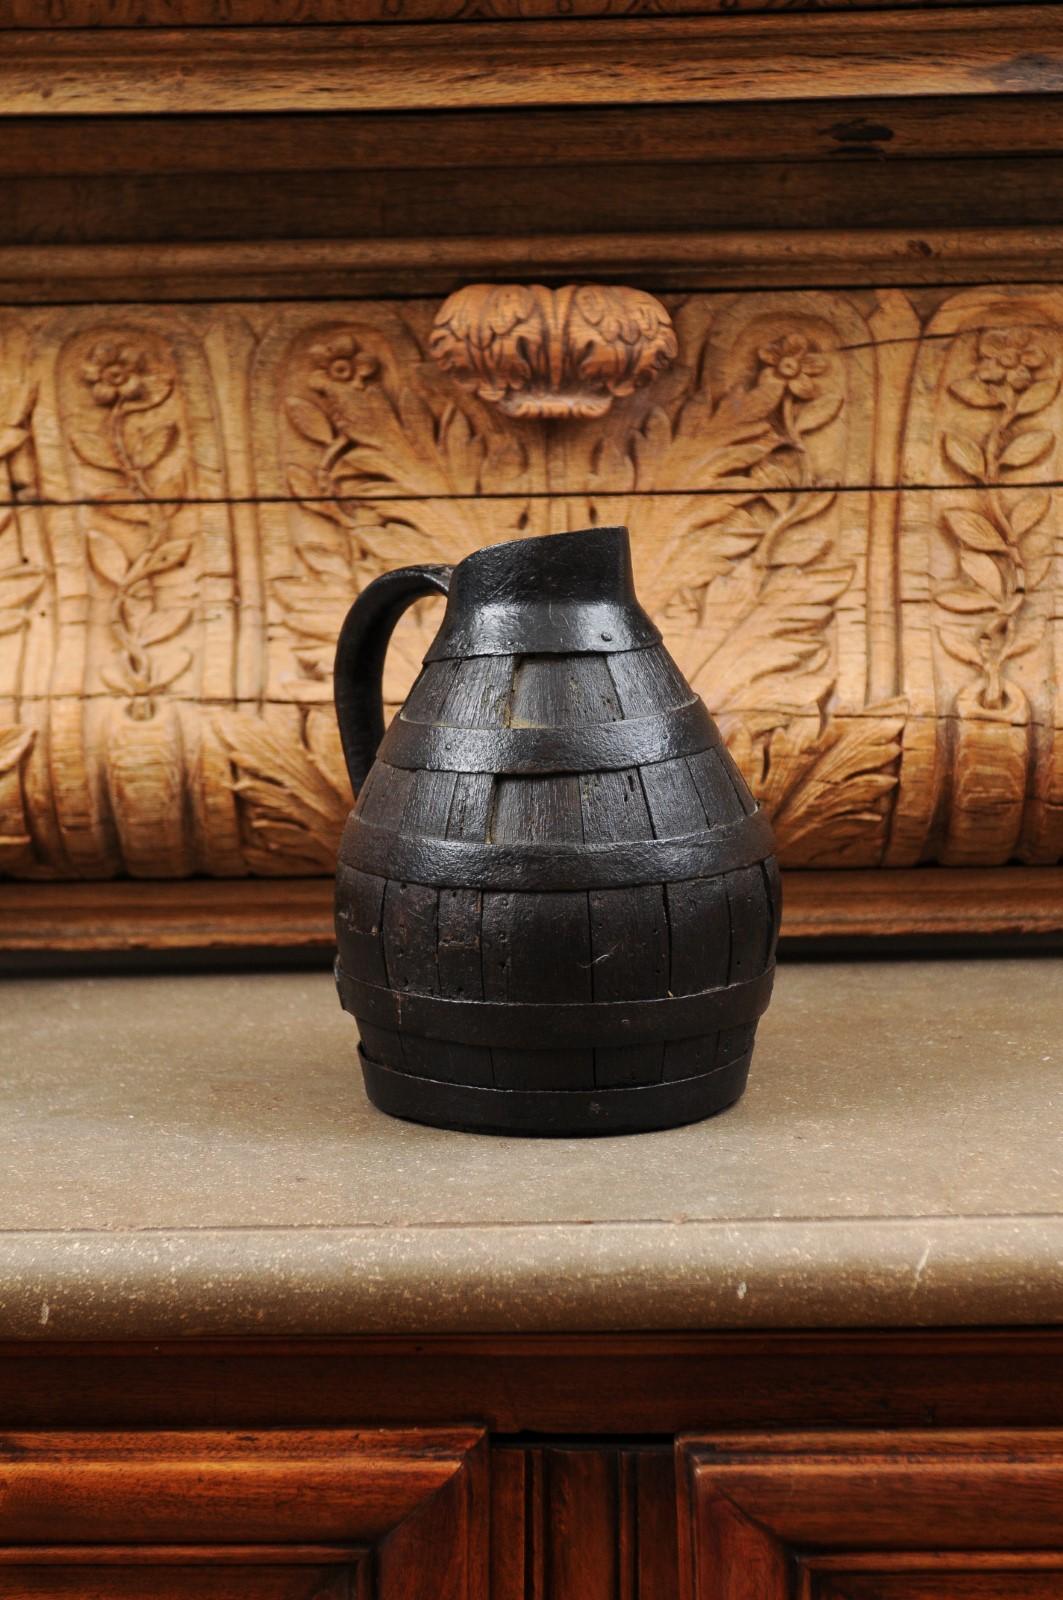 A French rustic wine jug from the 19th century, with dark patina. Created in France during the 19th century, this wine jug charms us with its rustic appeal and dark patina. Made of a succession of vertical wooden slats strengthened by metal braces,